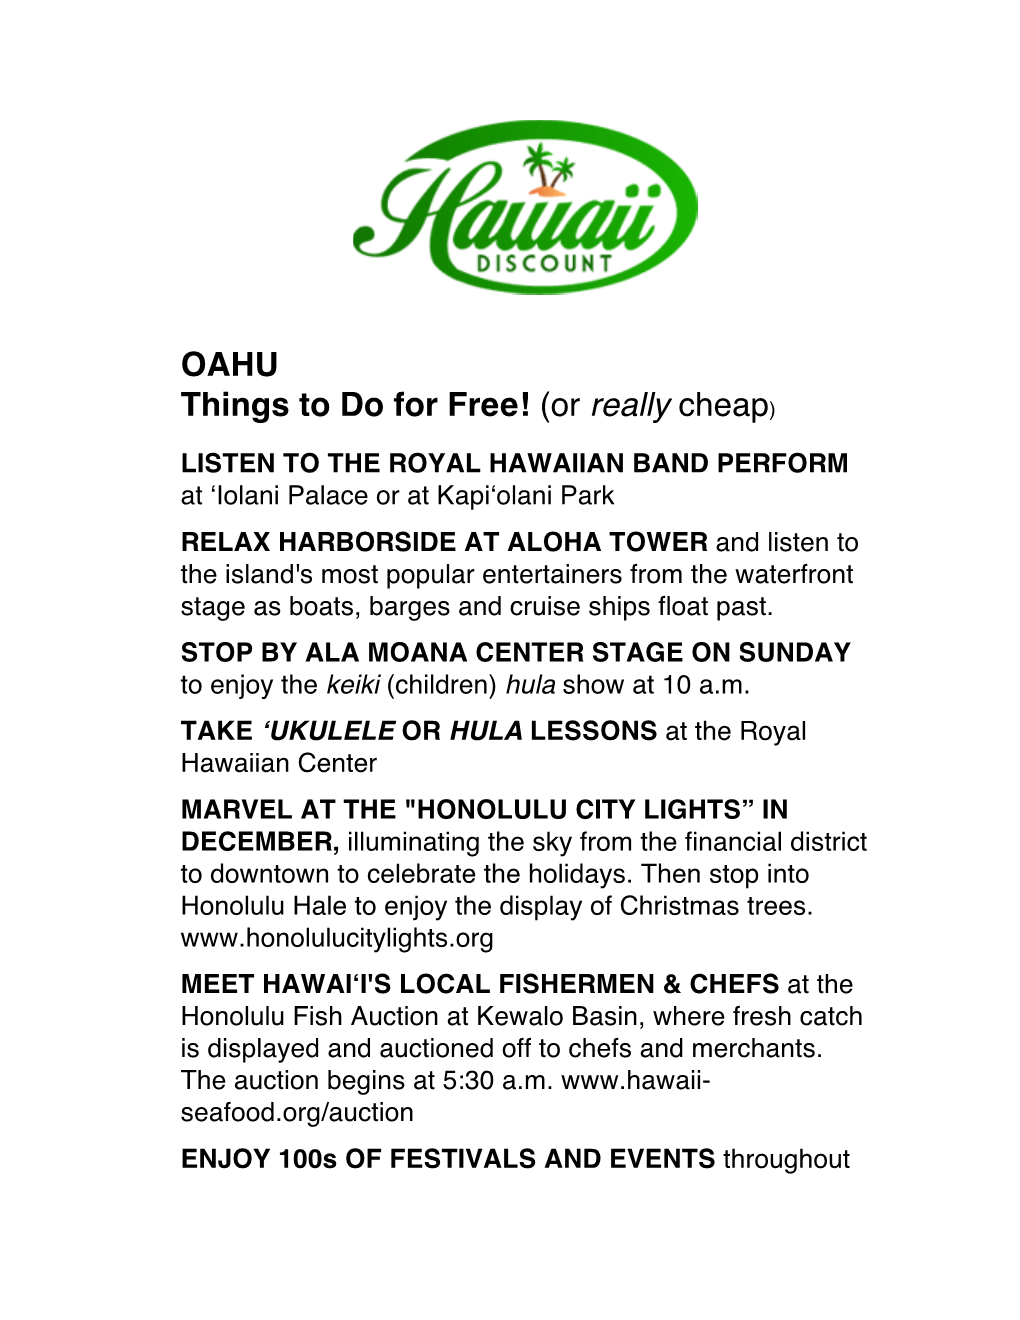 OAHU Things to Do for Free! (Or Really Cheap)